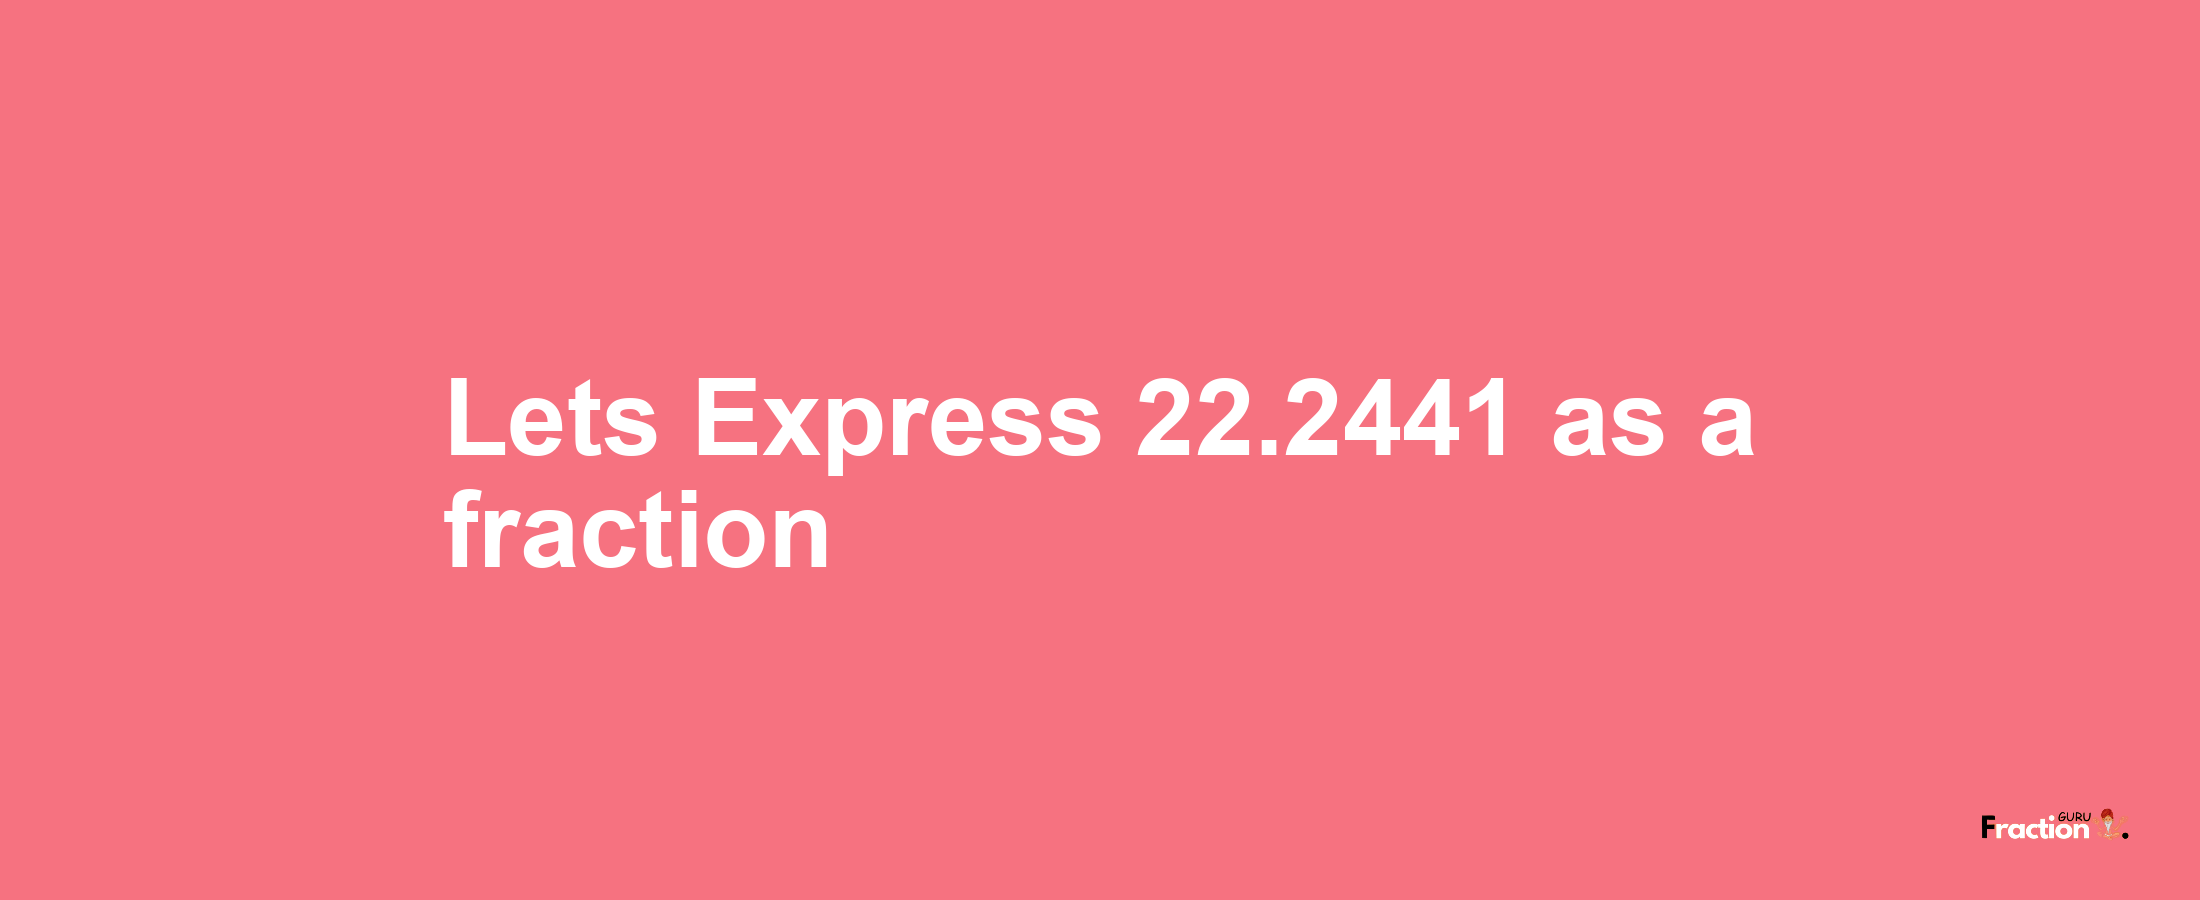 Lets Express 22.2441 as afraction